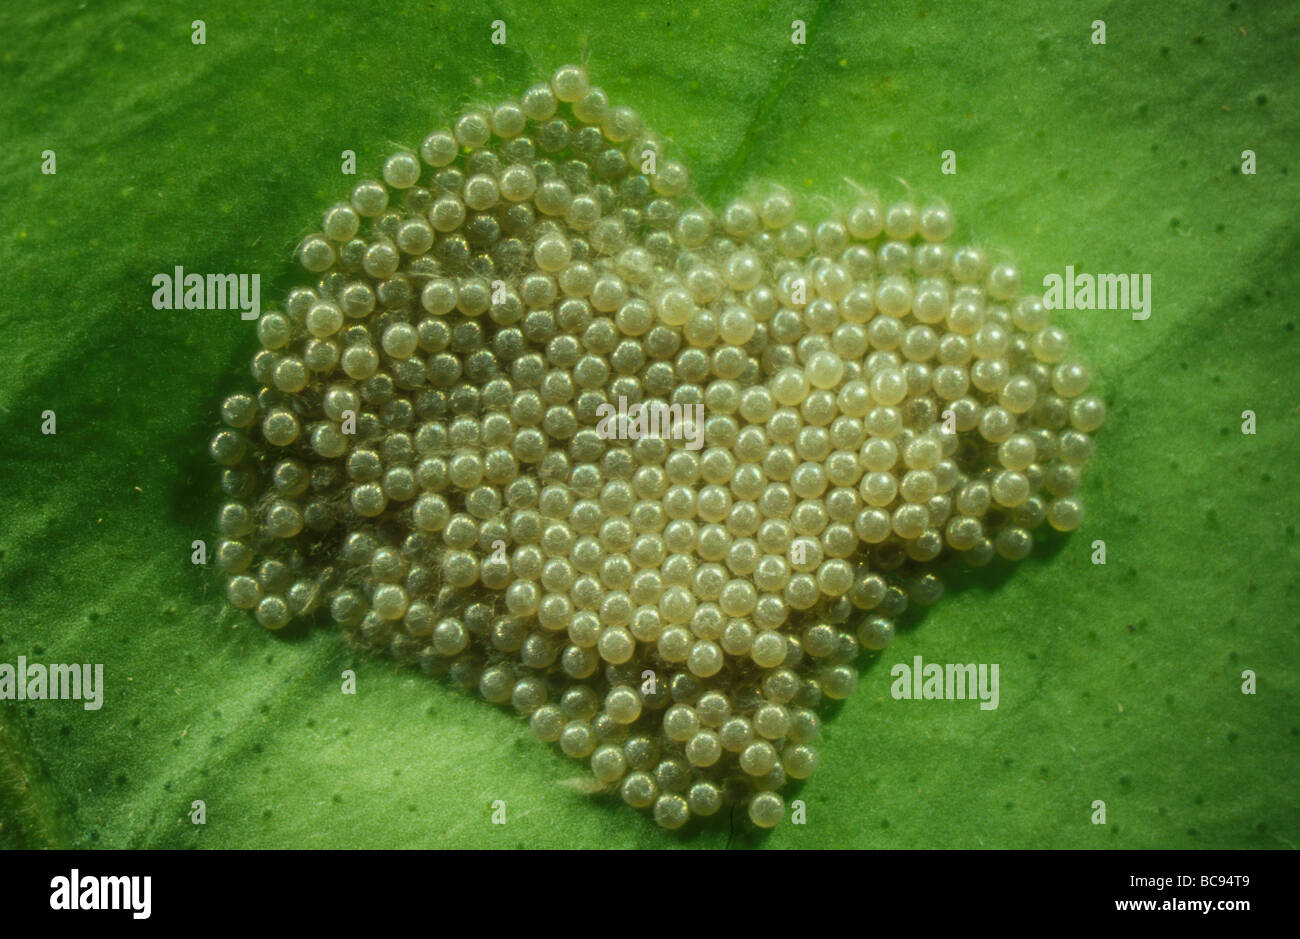 Cluster of Swallowtail Butterfly eggs laid on a leaf Stock Photo